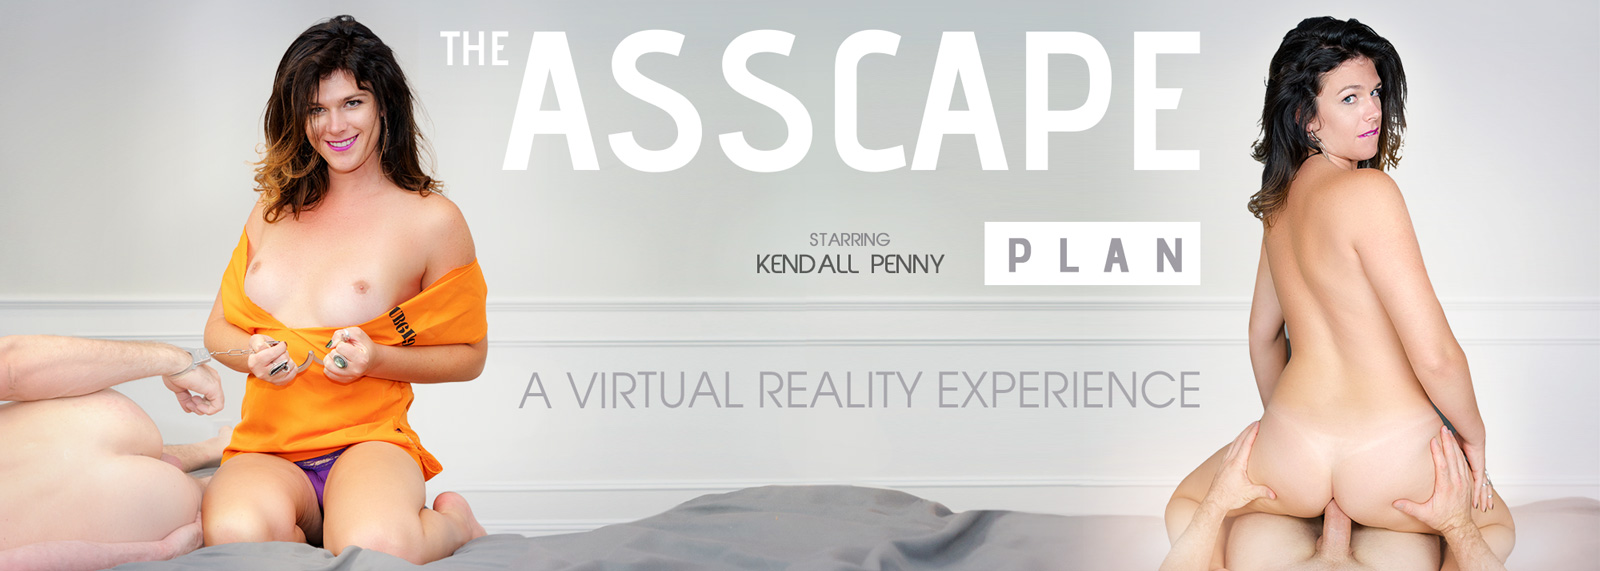 The Asscape Plan - VR Porn Video, Starring Kendall Penny VR